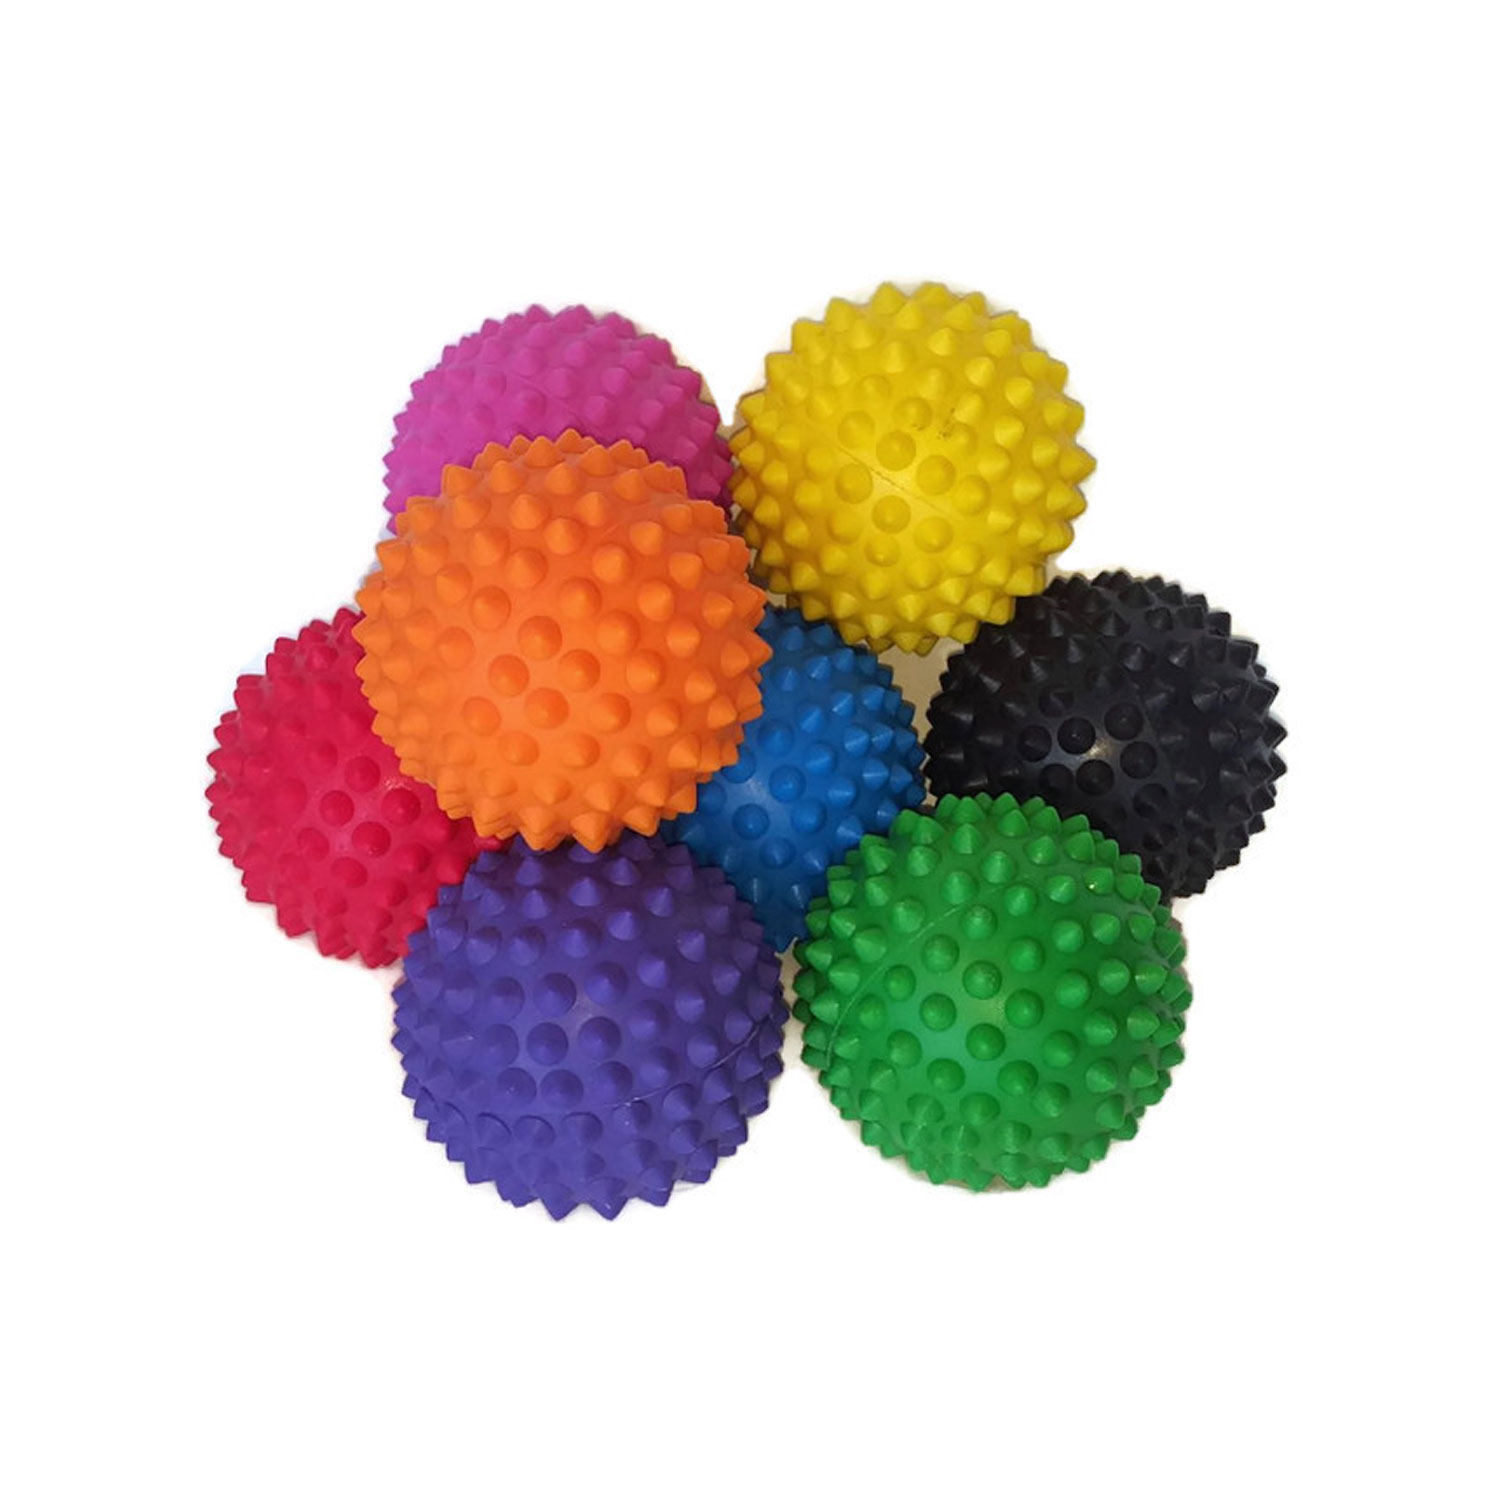 Spikey balls for tight muscles and joints self massage physio ball